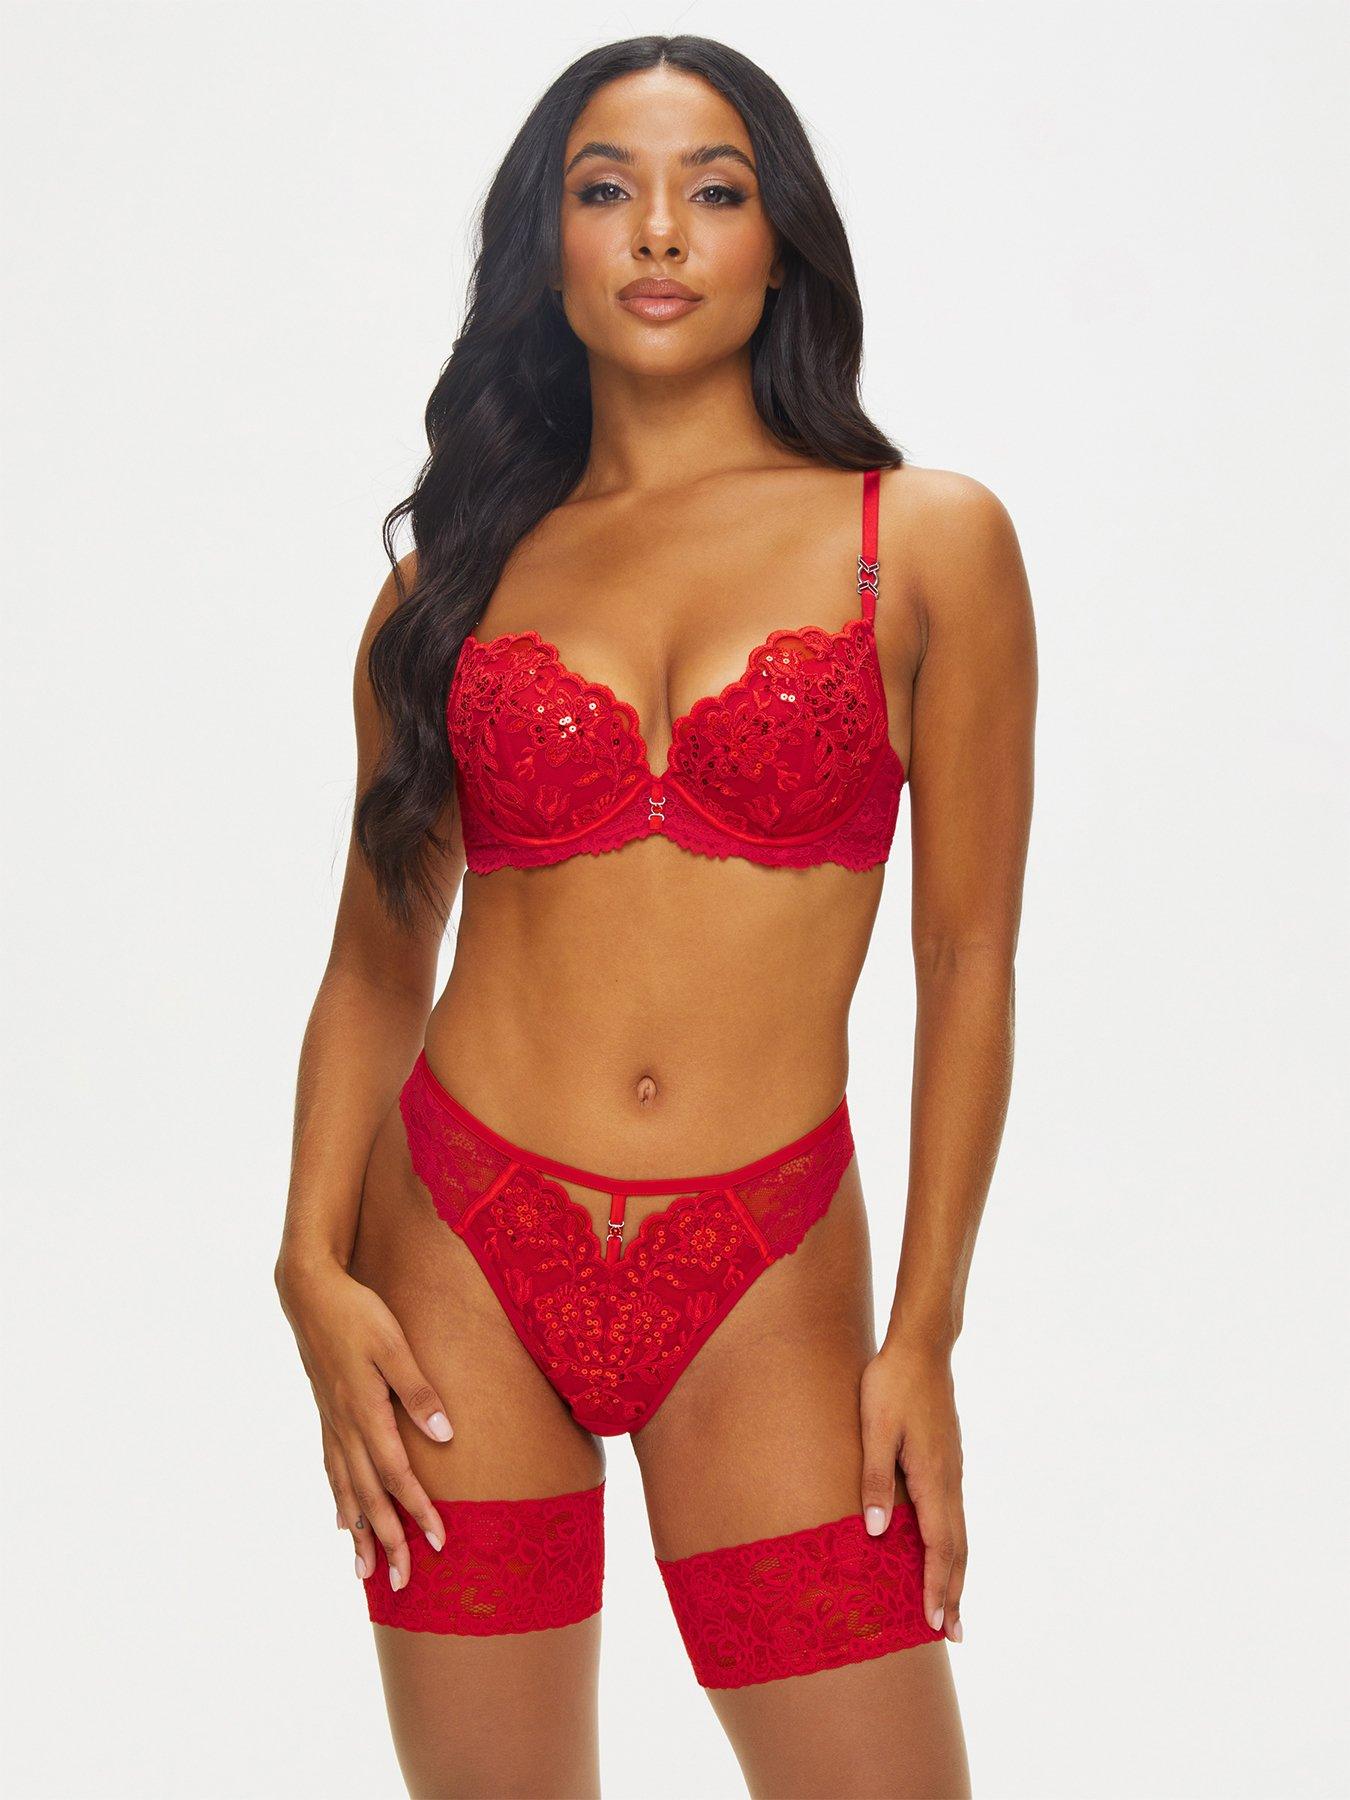 Ann Summers Carmen lace thong in red